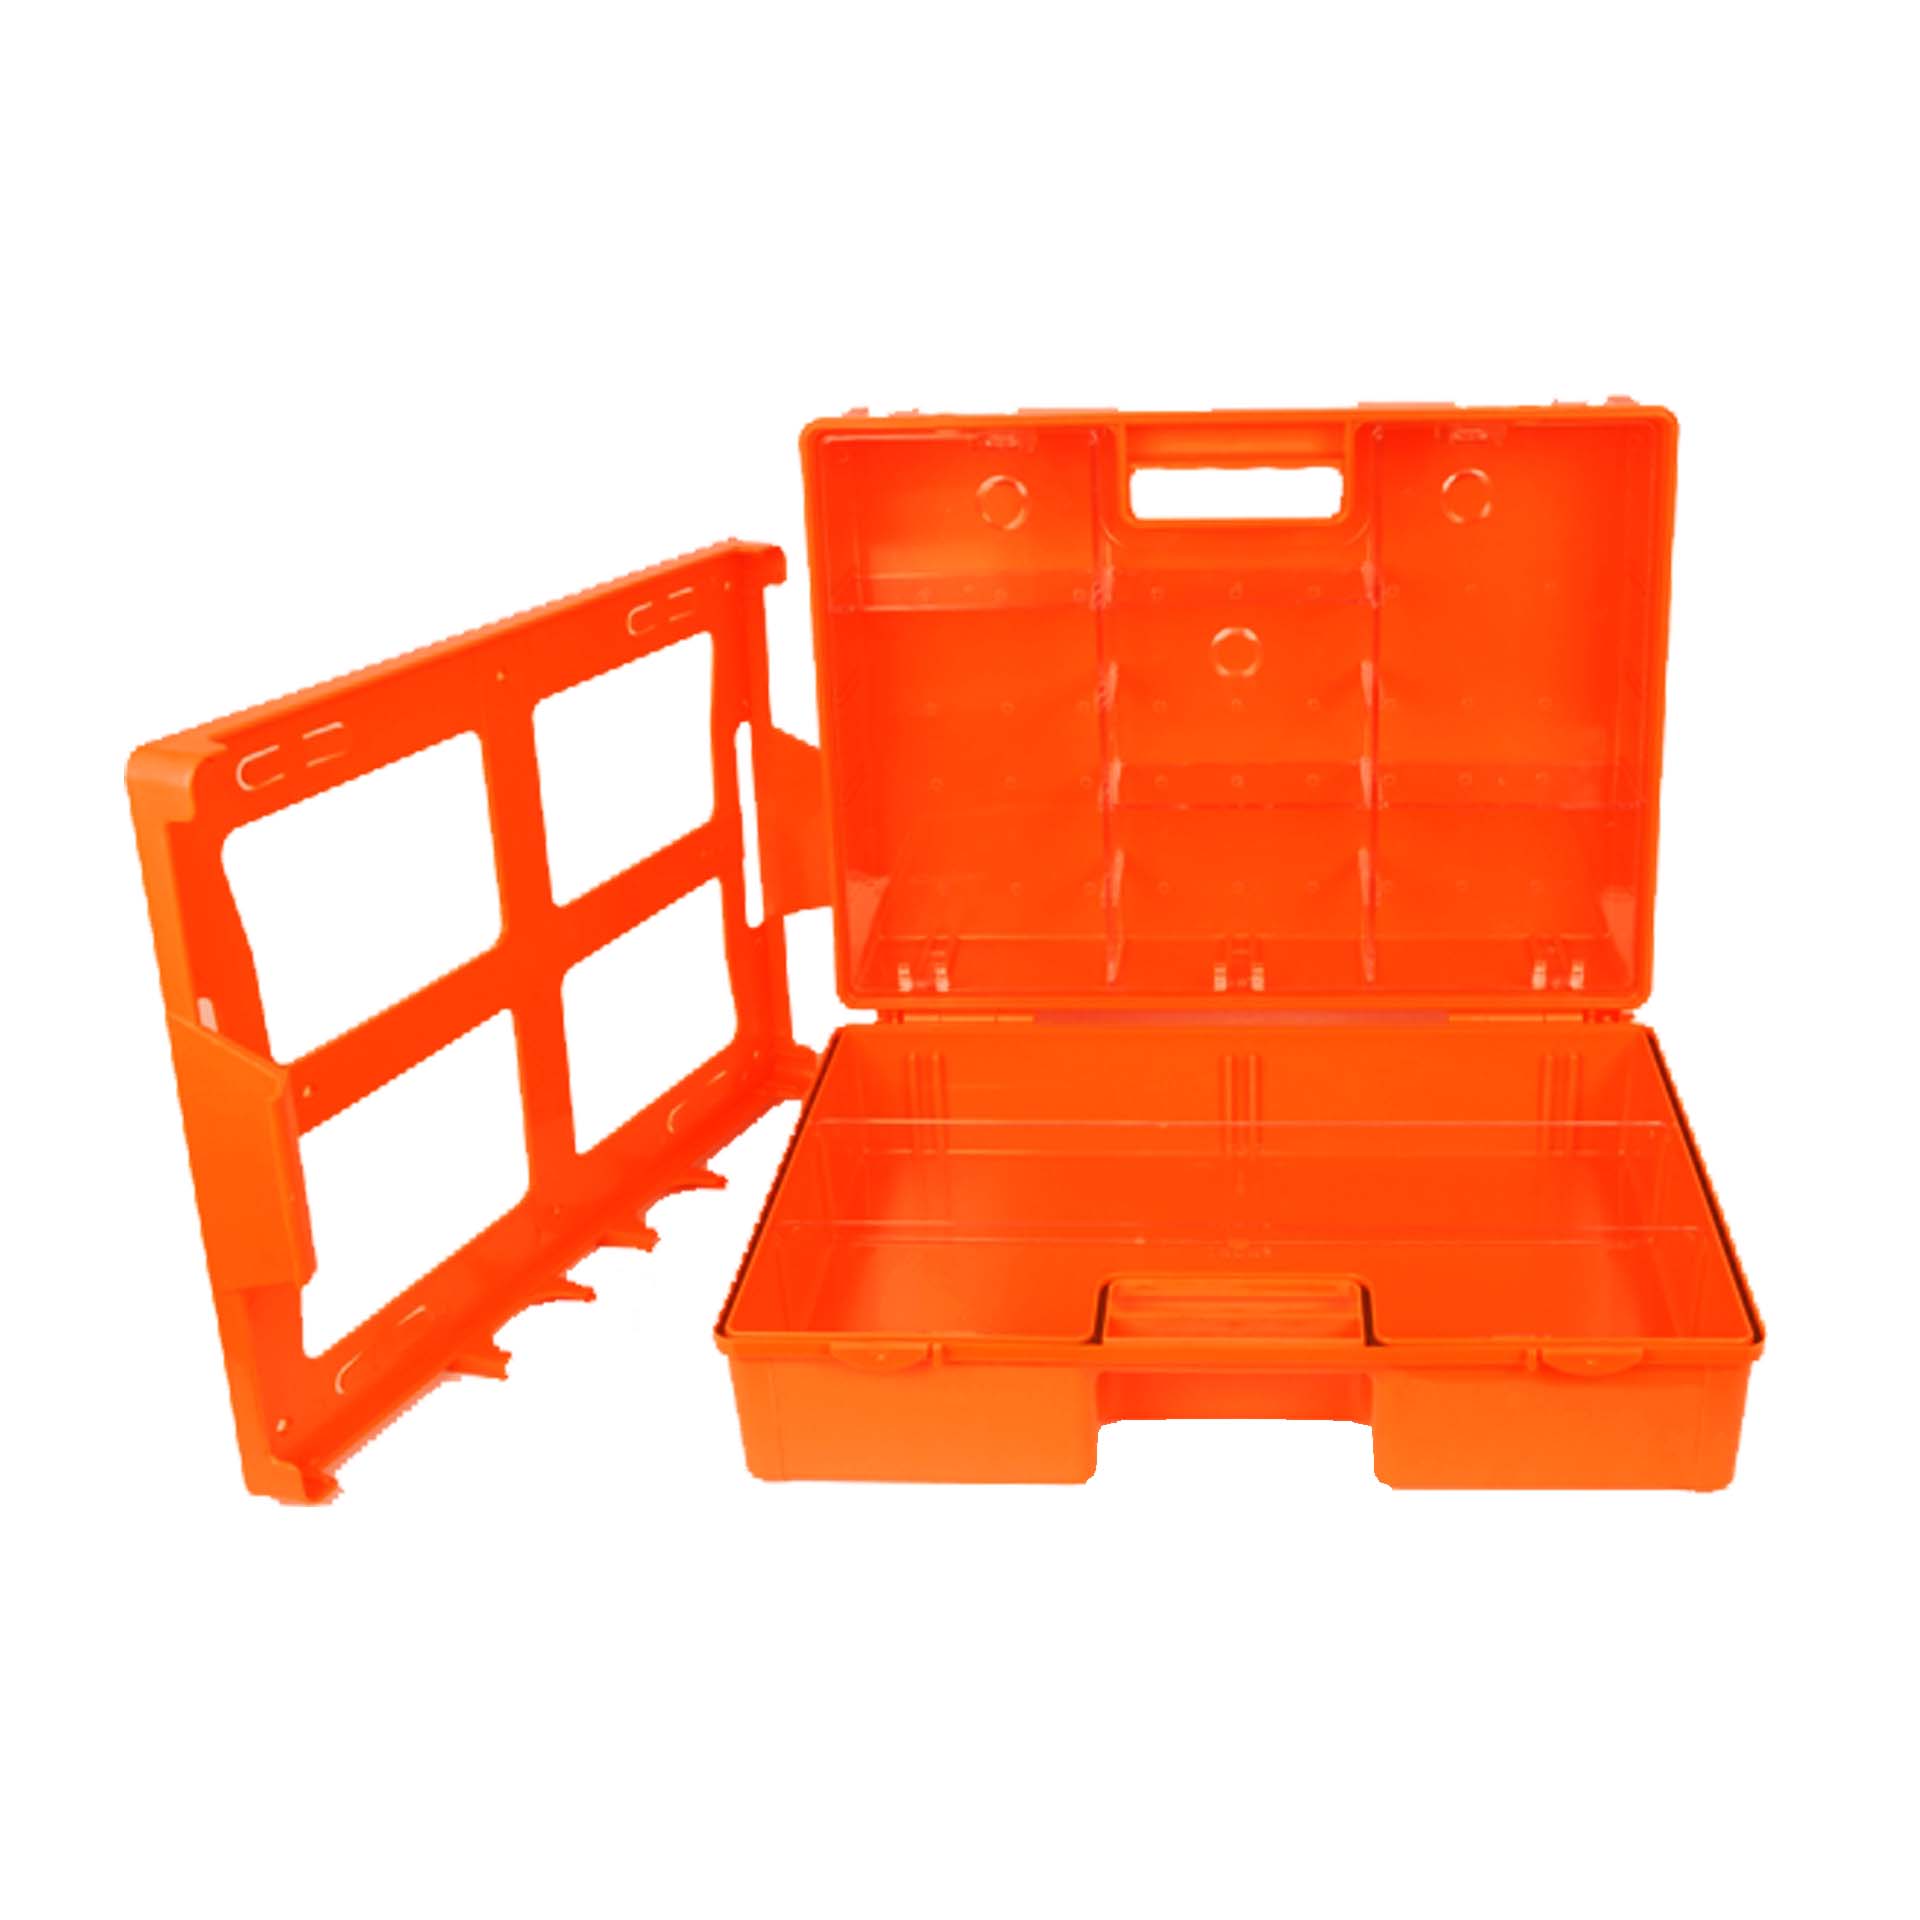 Image of the inside of an orange first aid box